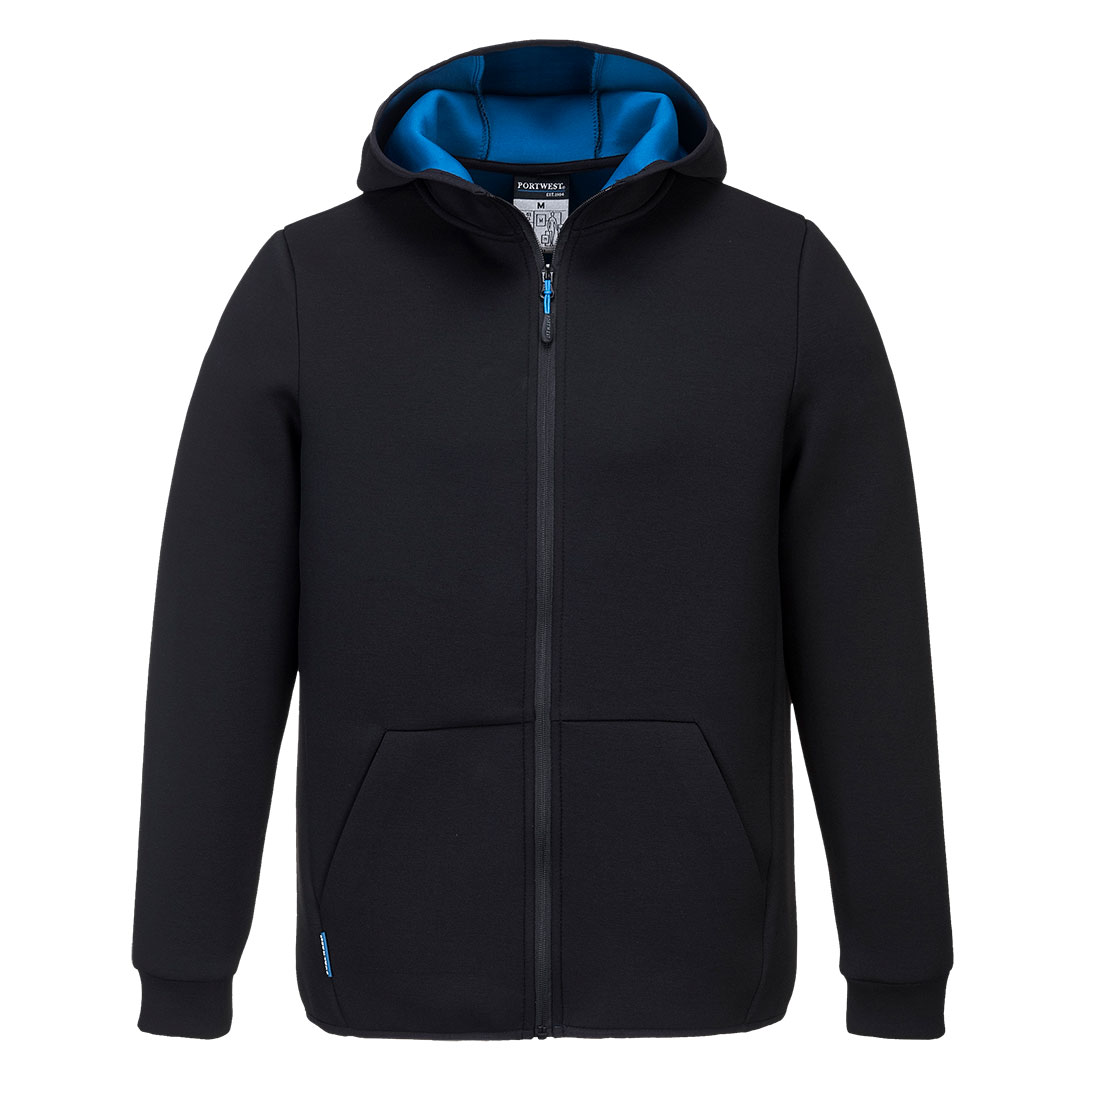 PORTWEST KX3 TECHNICAL FLEECE with contrast inner fabric